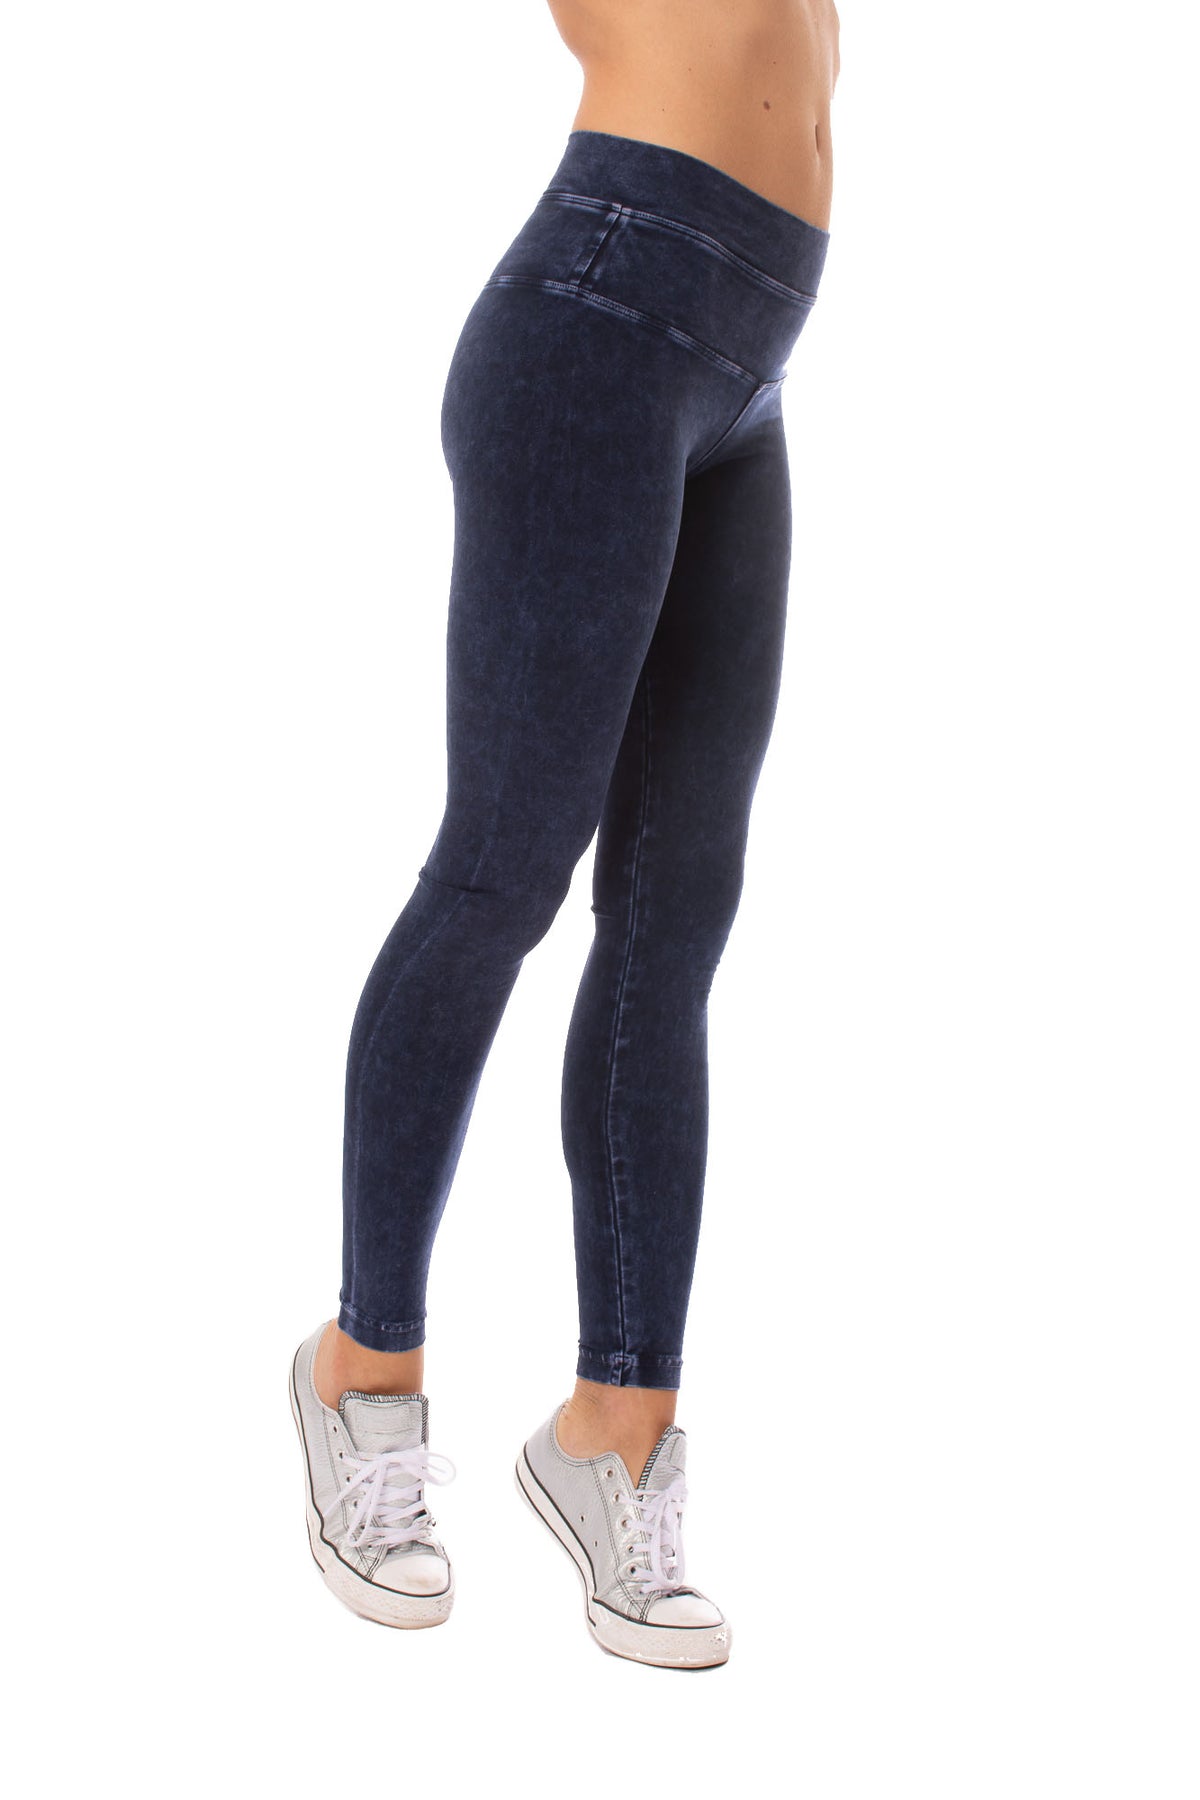 Hard Tail Scrunchy Waistband Ankle Leggings at